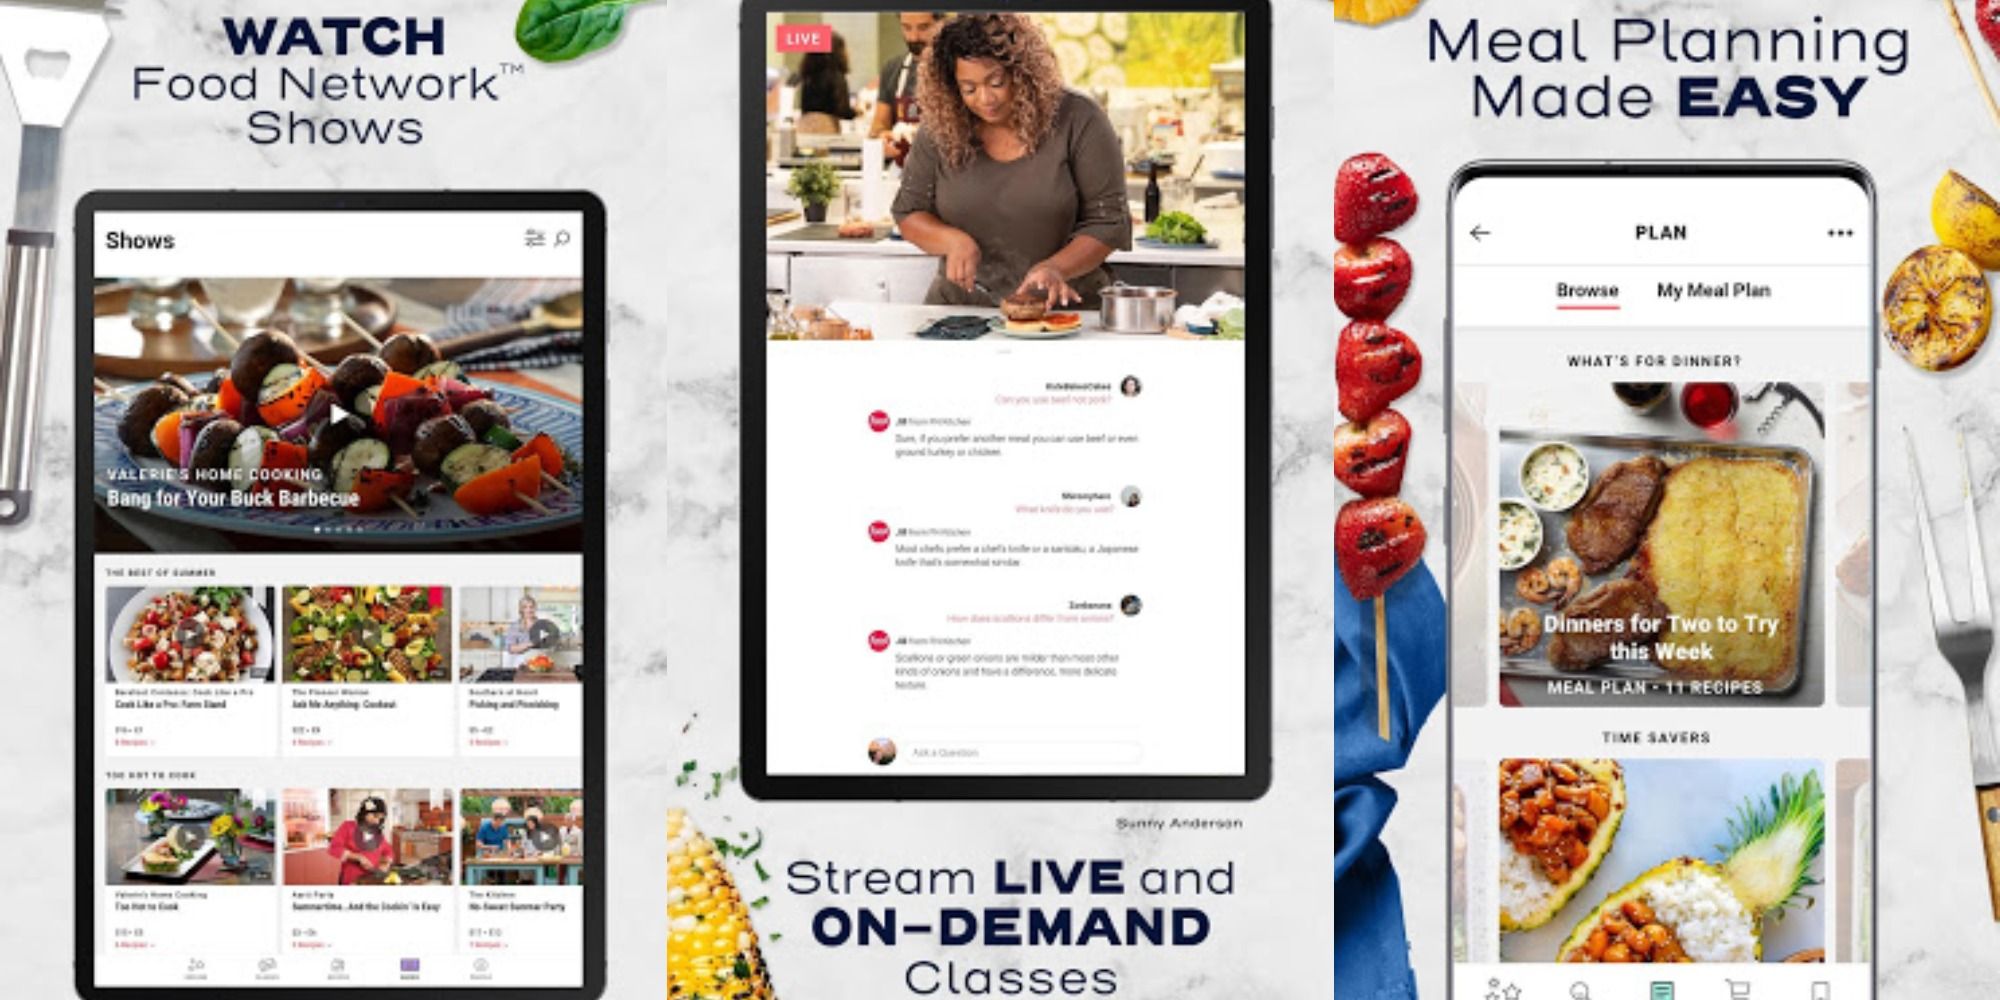 An image of the Food Network Kitchen app on the mobile